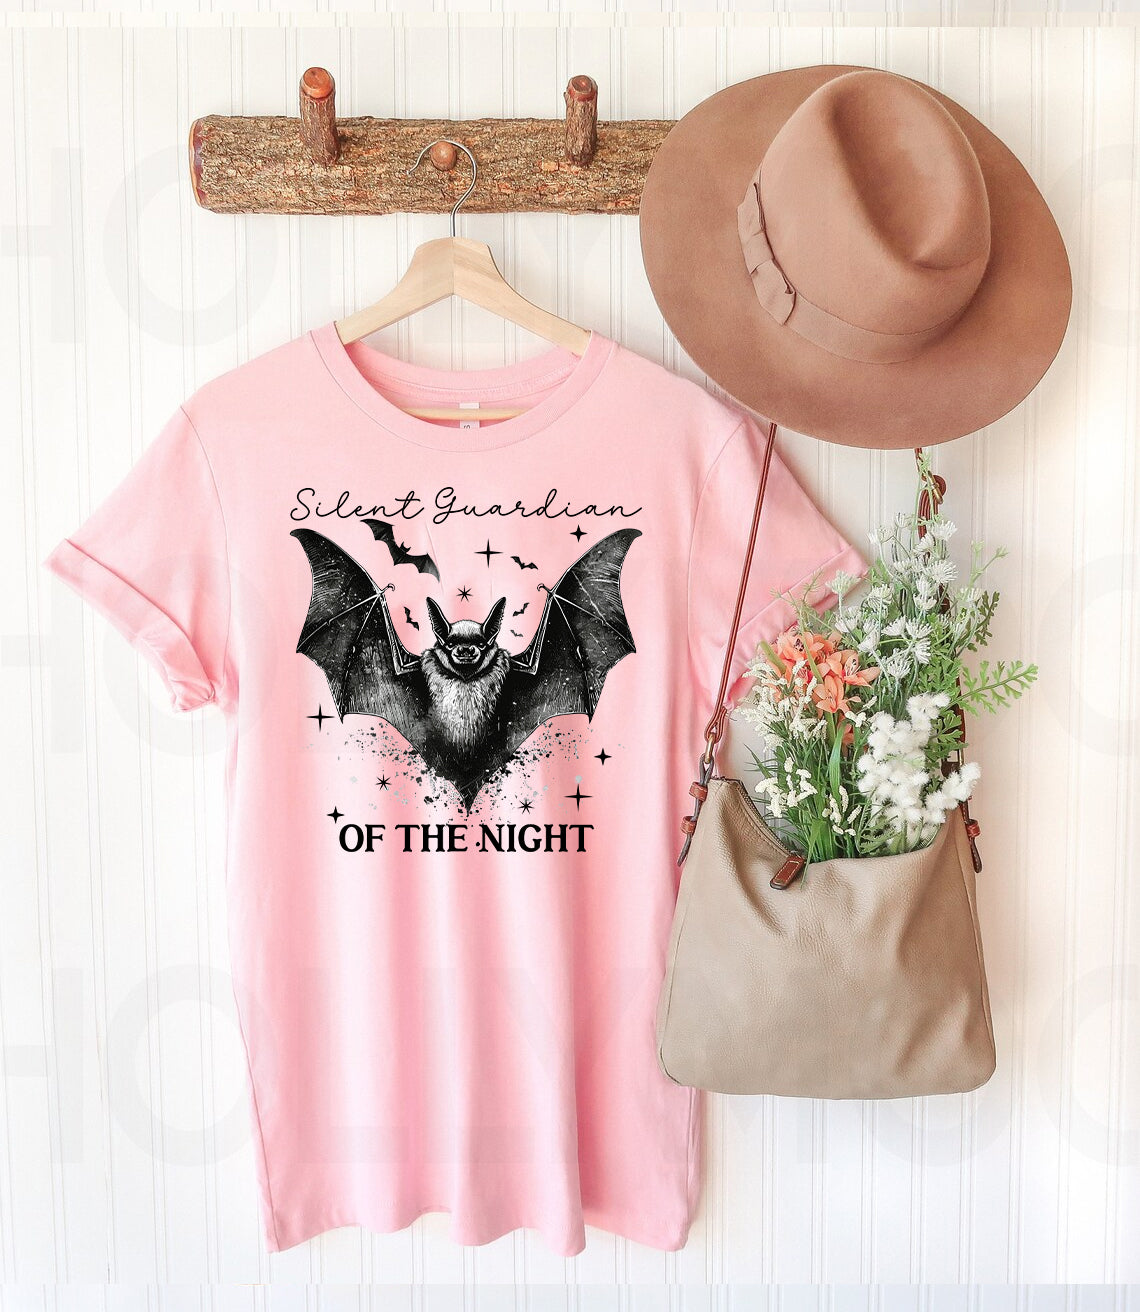 Silent Guardian of the Night - Graphic Tee